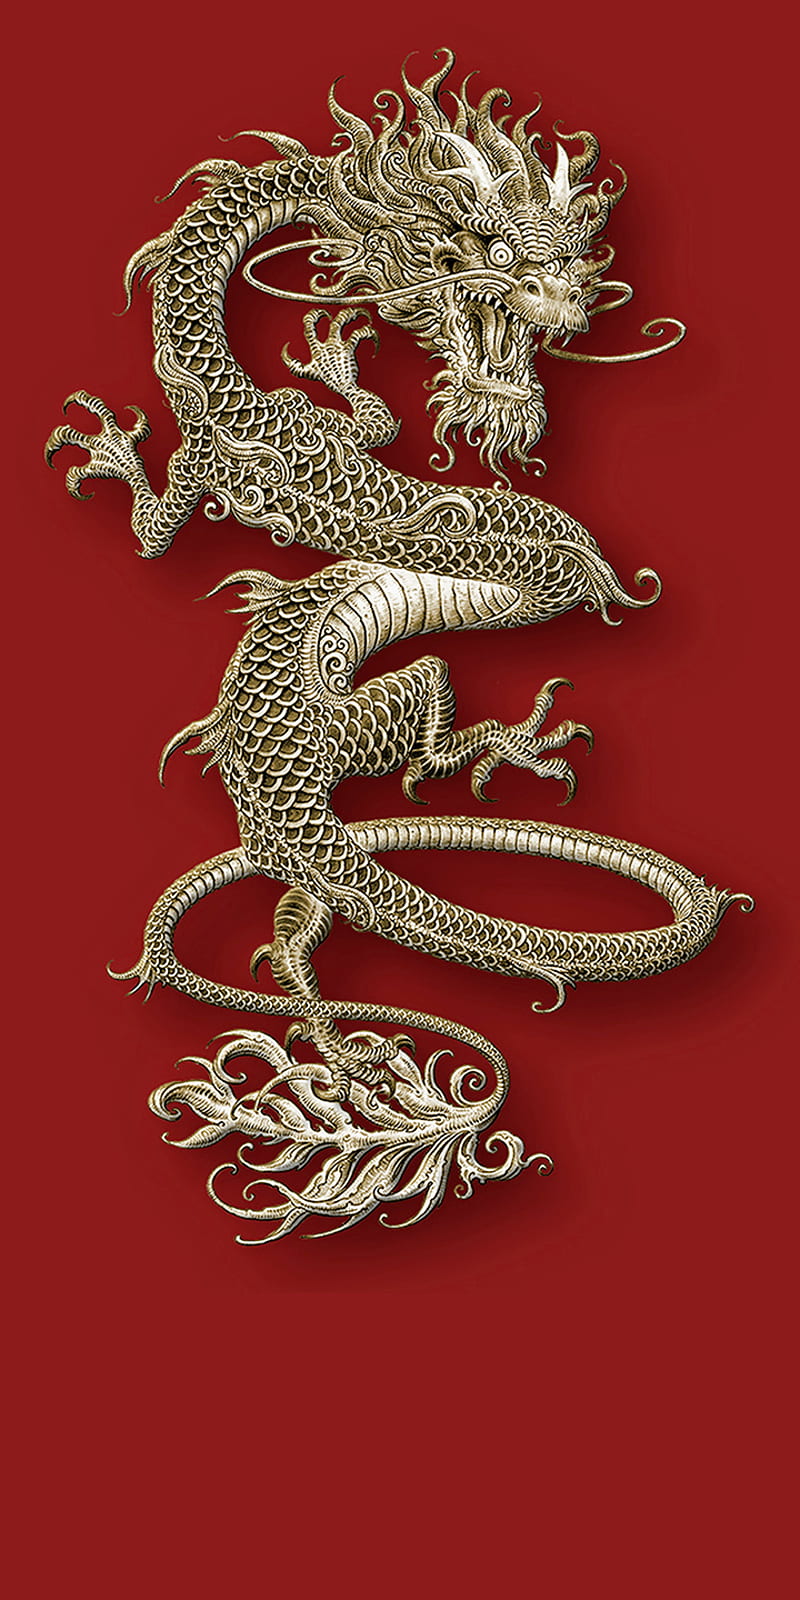 Gold Dragon Wallpaper For Desktop Background Pictures Of Chinese Dragon  Background Image And Wallpaper for Free Download